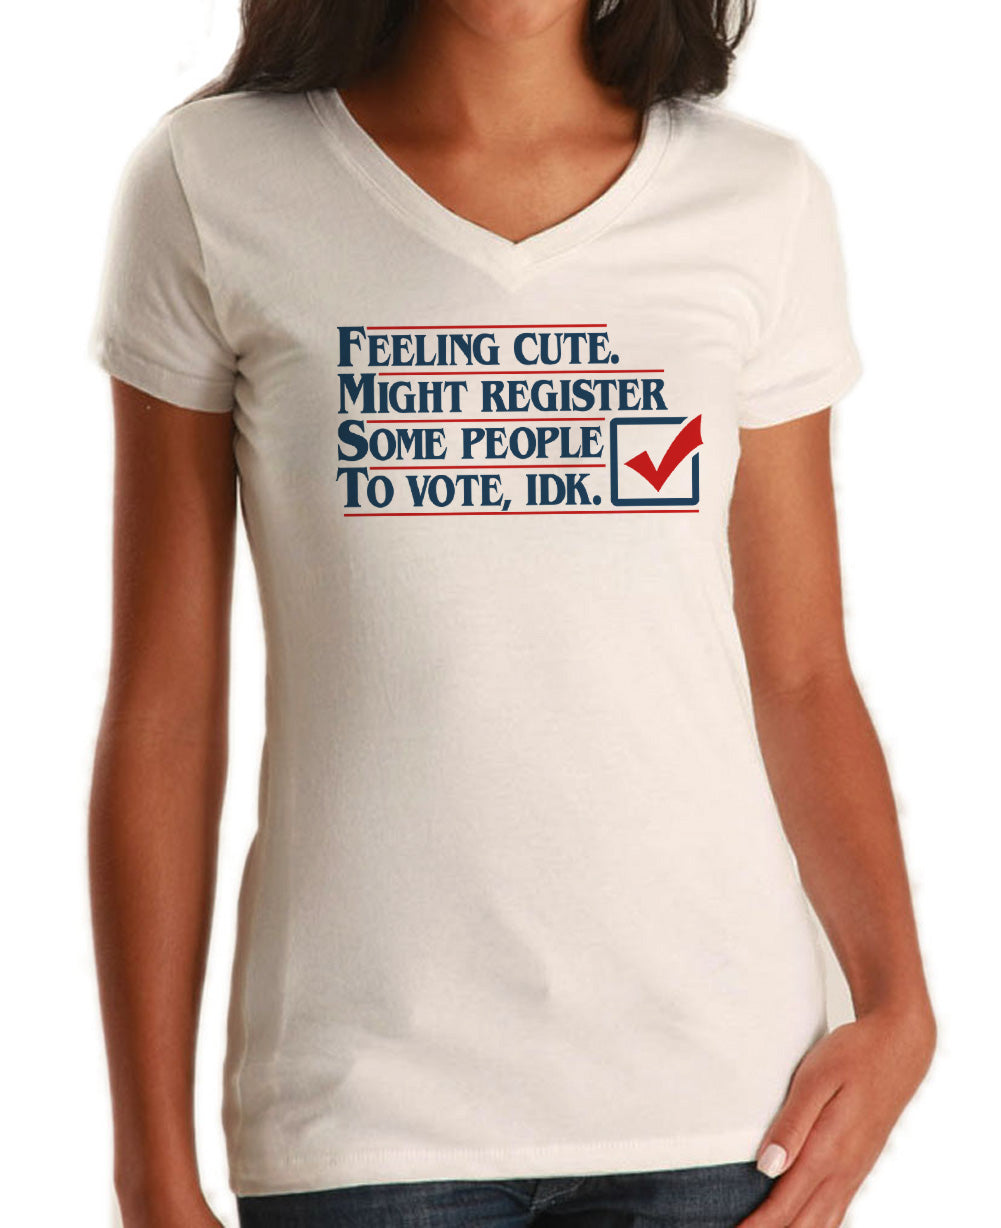 Women's Feeling Cute Might Register Some People to Vote Vneck T-Shirt